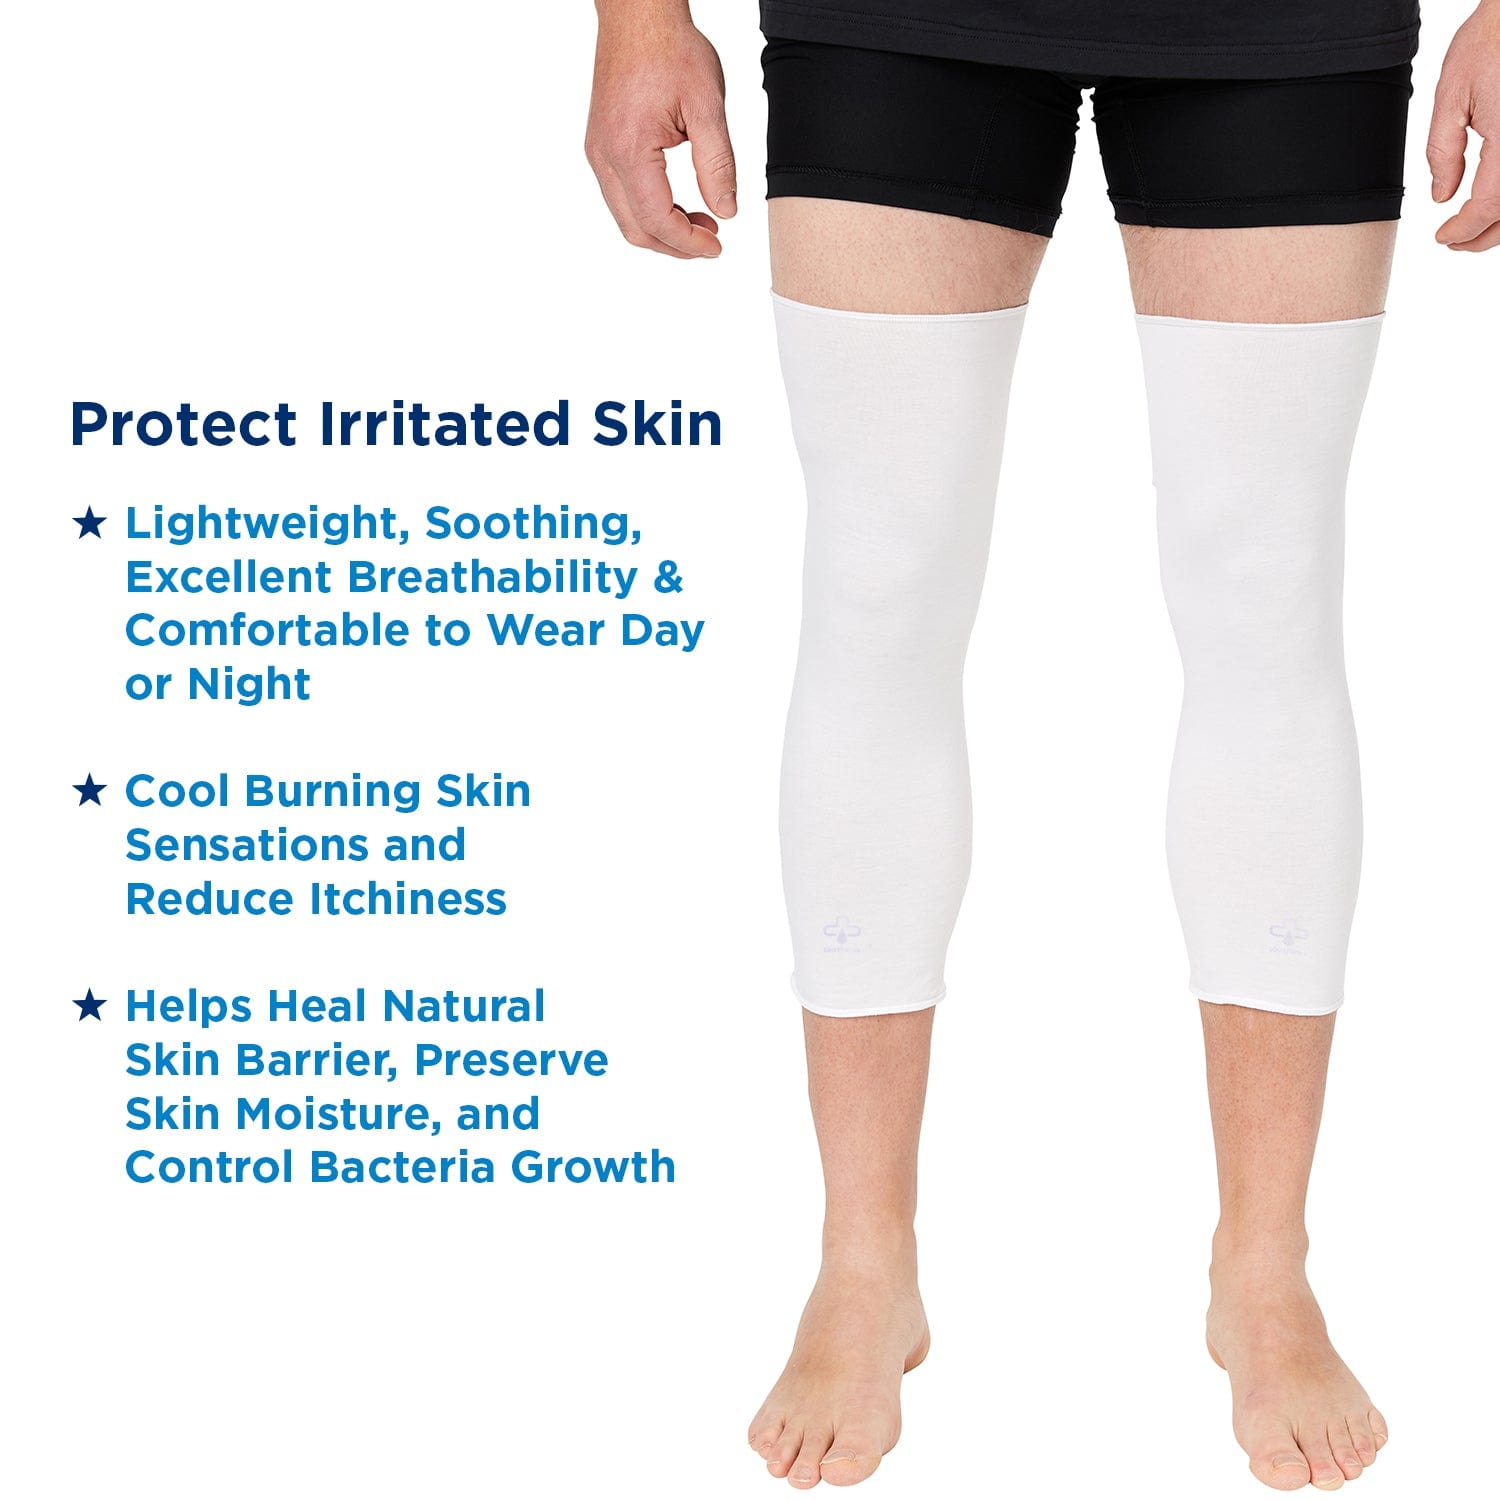 Wrap-E-Soothe Bottoms - Pants with foot covers